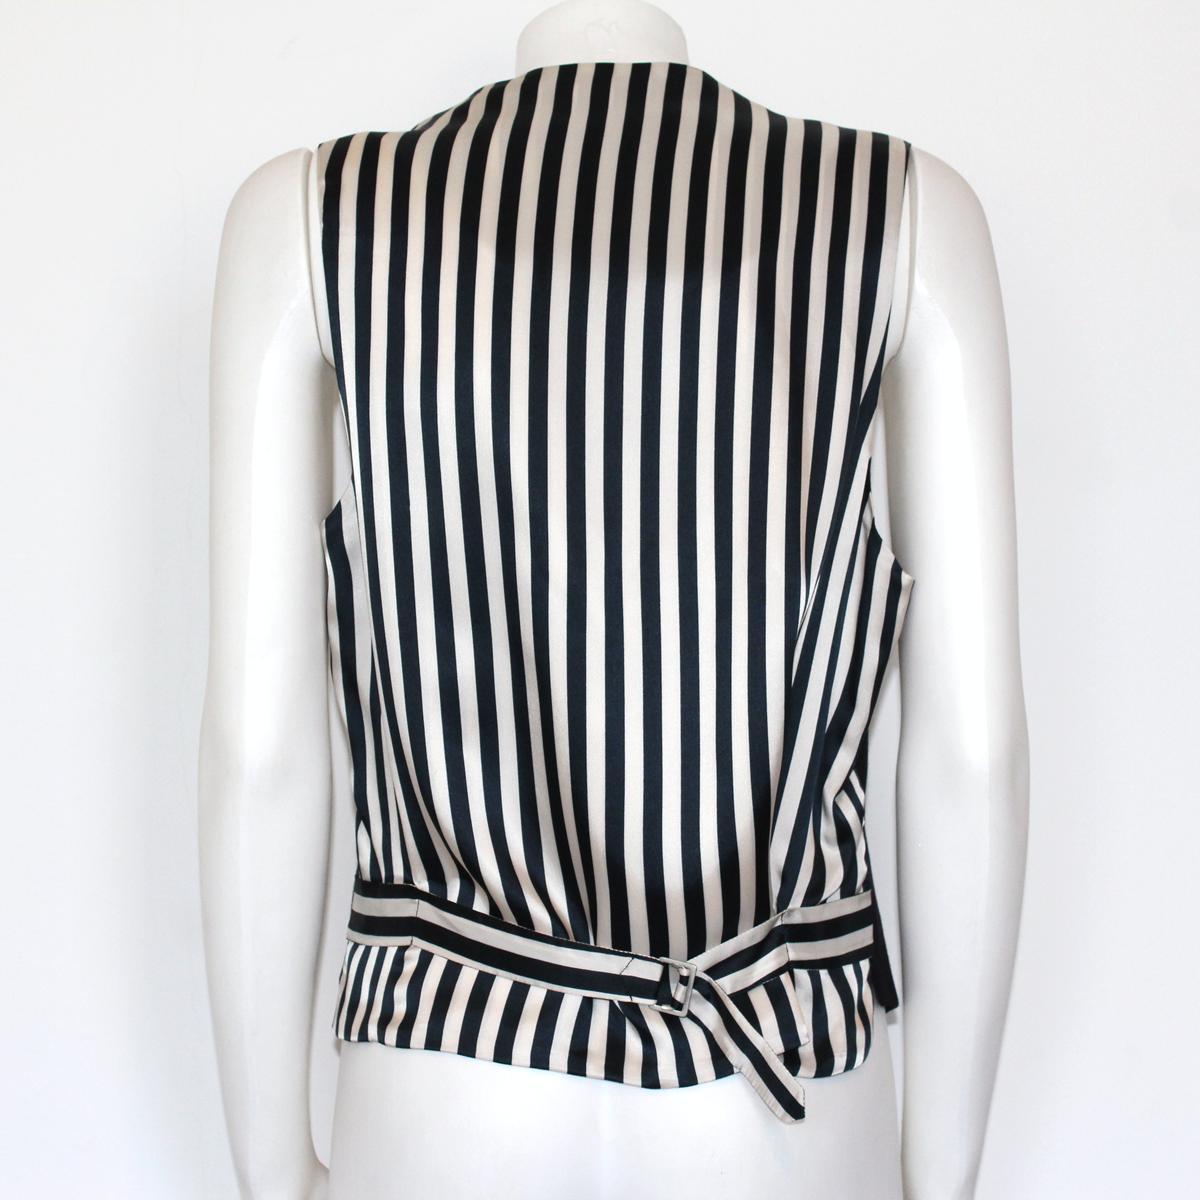 For Moschino vintage lovers we have a stunning vest
Iconic and ultra rare 
Moschino Cheap and Chic
Vintage of late 80's
Wool
Chick pattern
White and blue stripes pattern on the back
Buttons closure
Length cm 60 (23.6 inches)
Size 48 / L
Worldwide